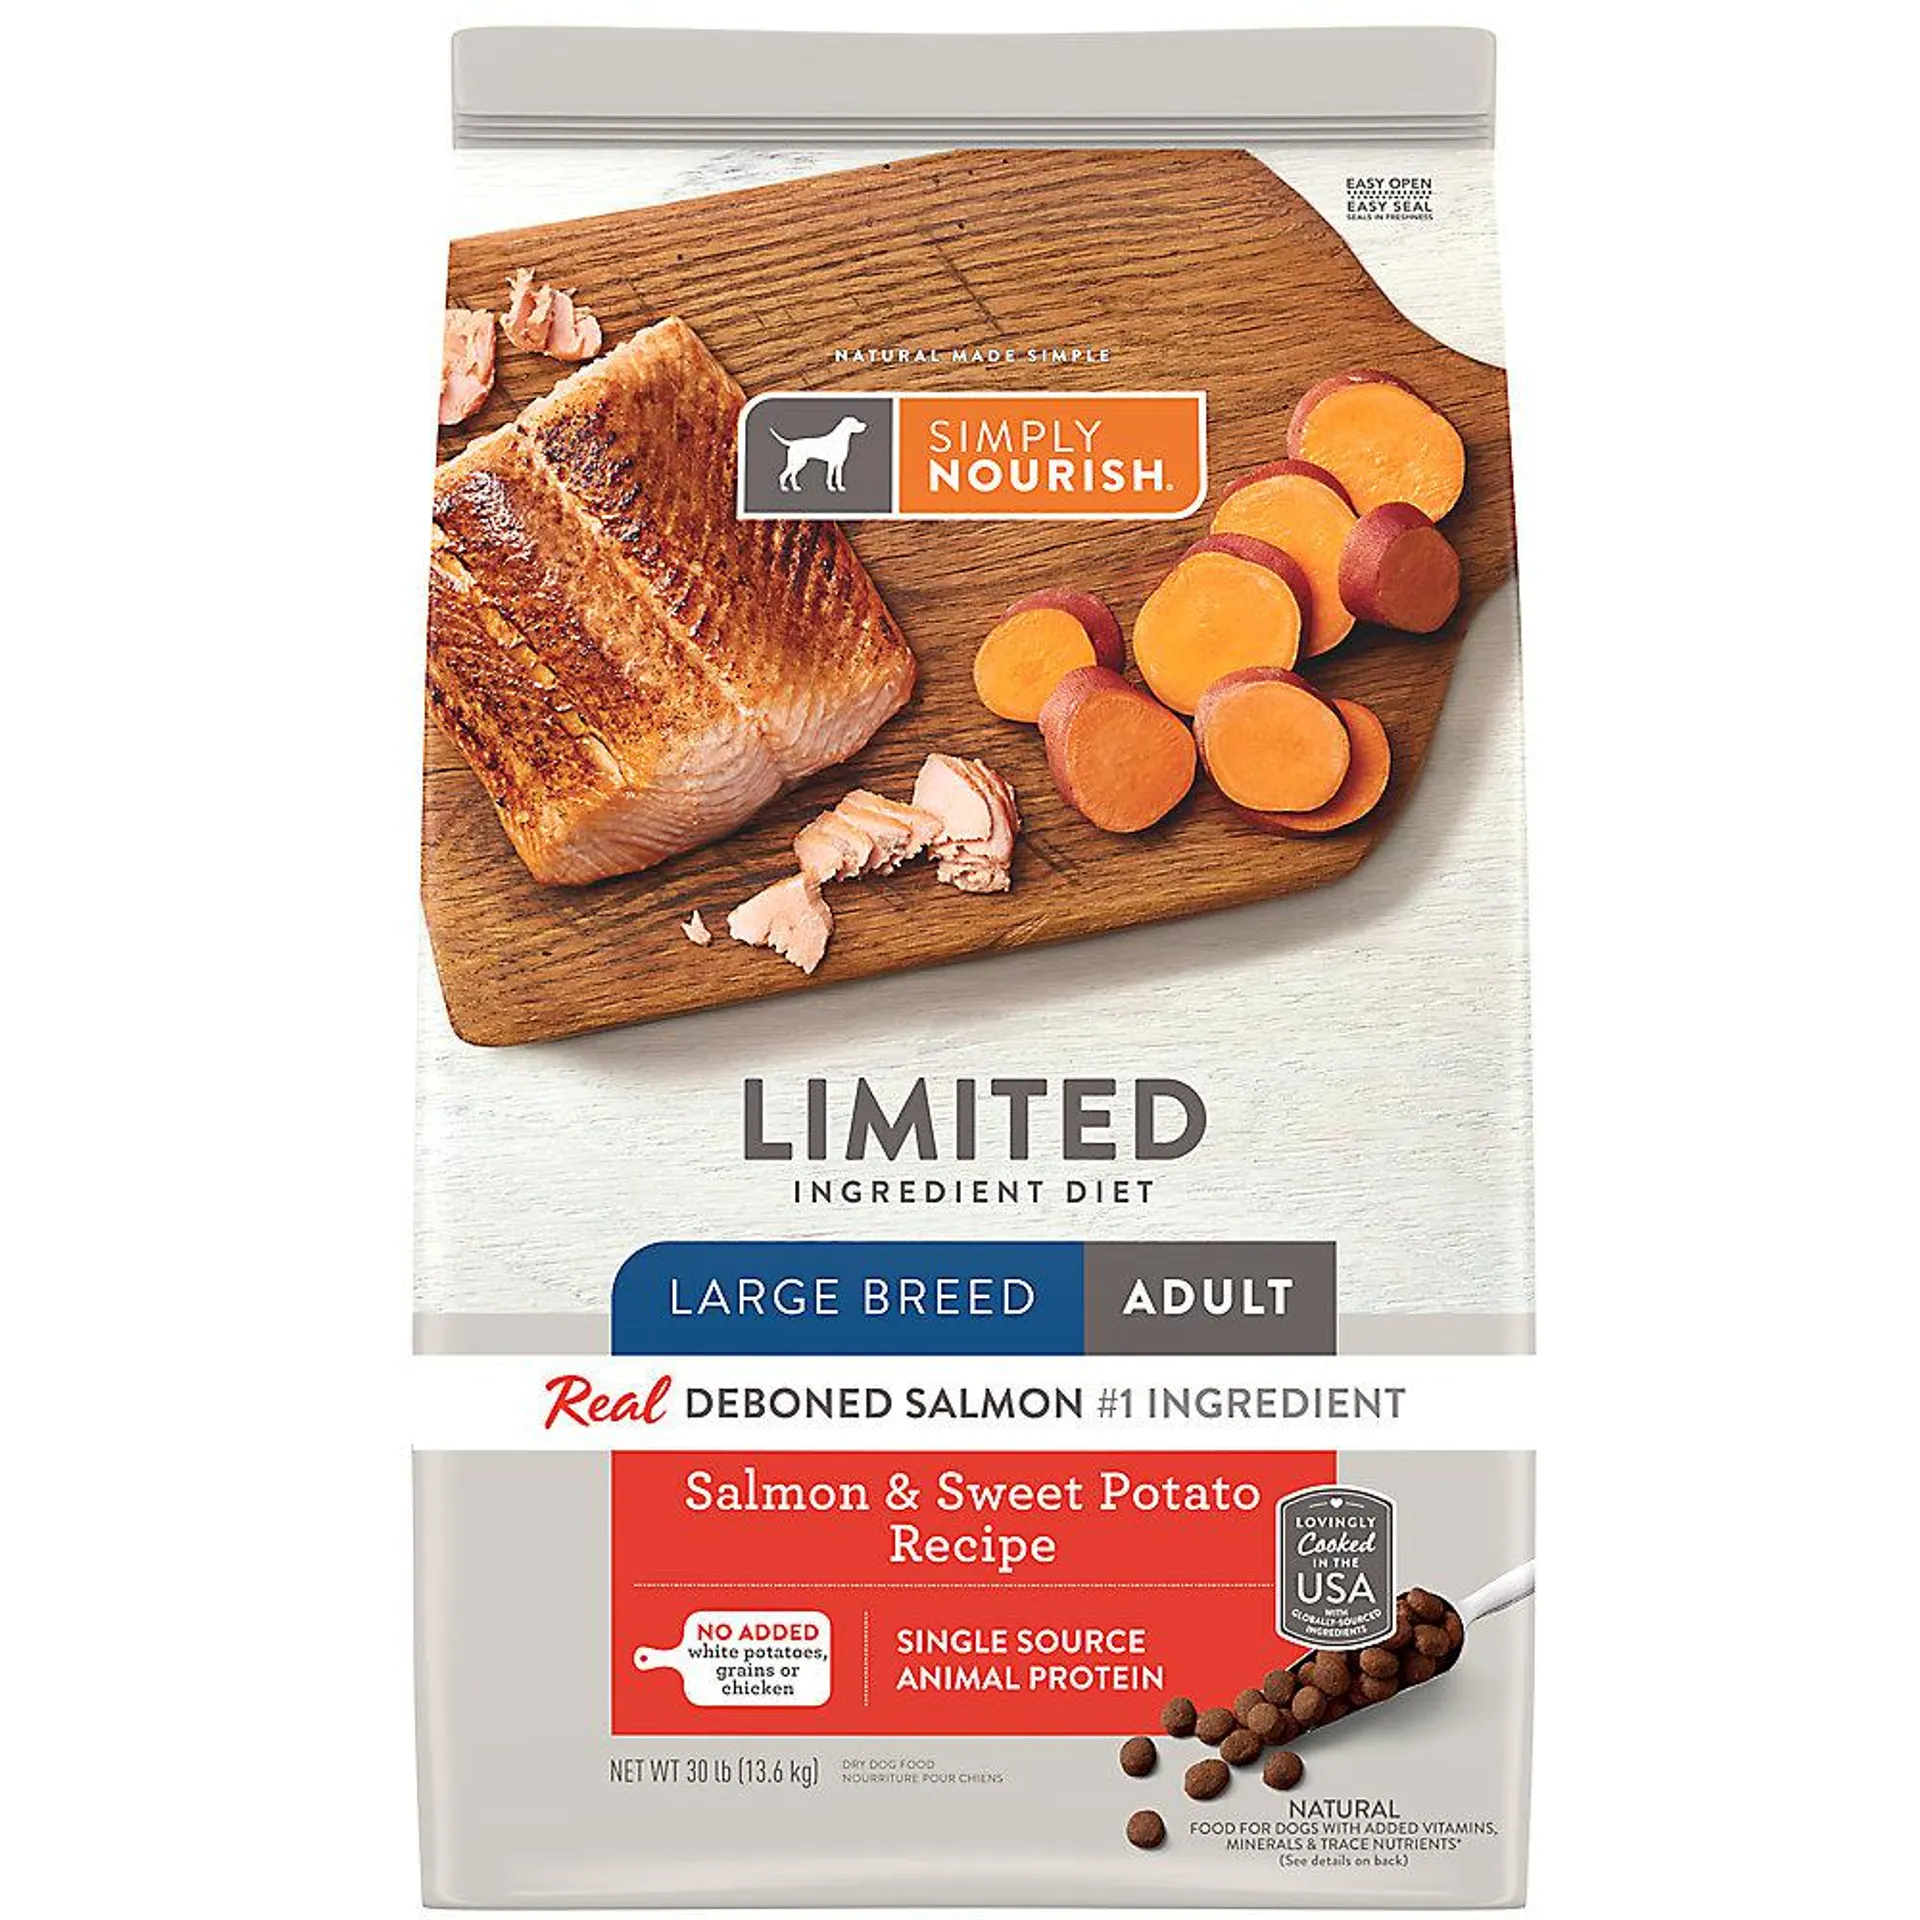 Simply Nourish® Limited Ingredient Diet Large Breed Adult Dry Dog Food - Salmon & Sweet Potato